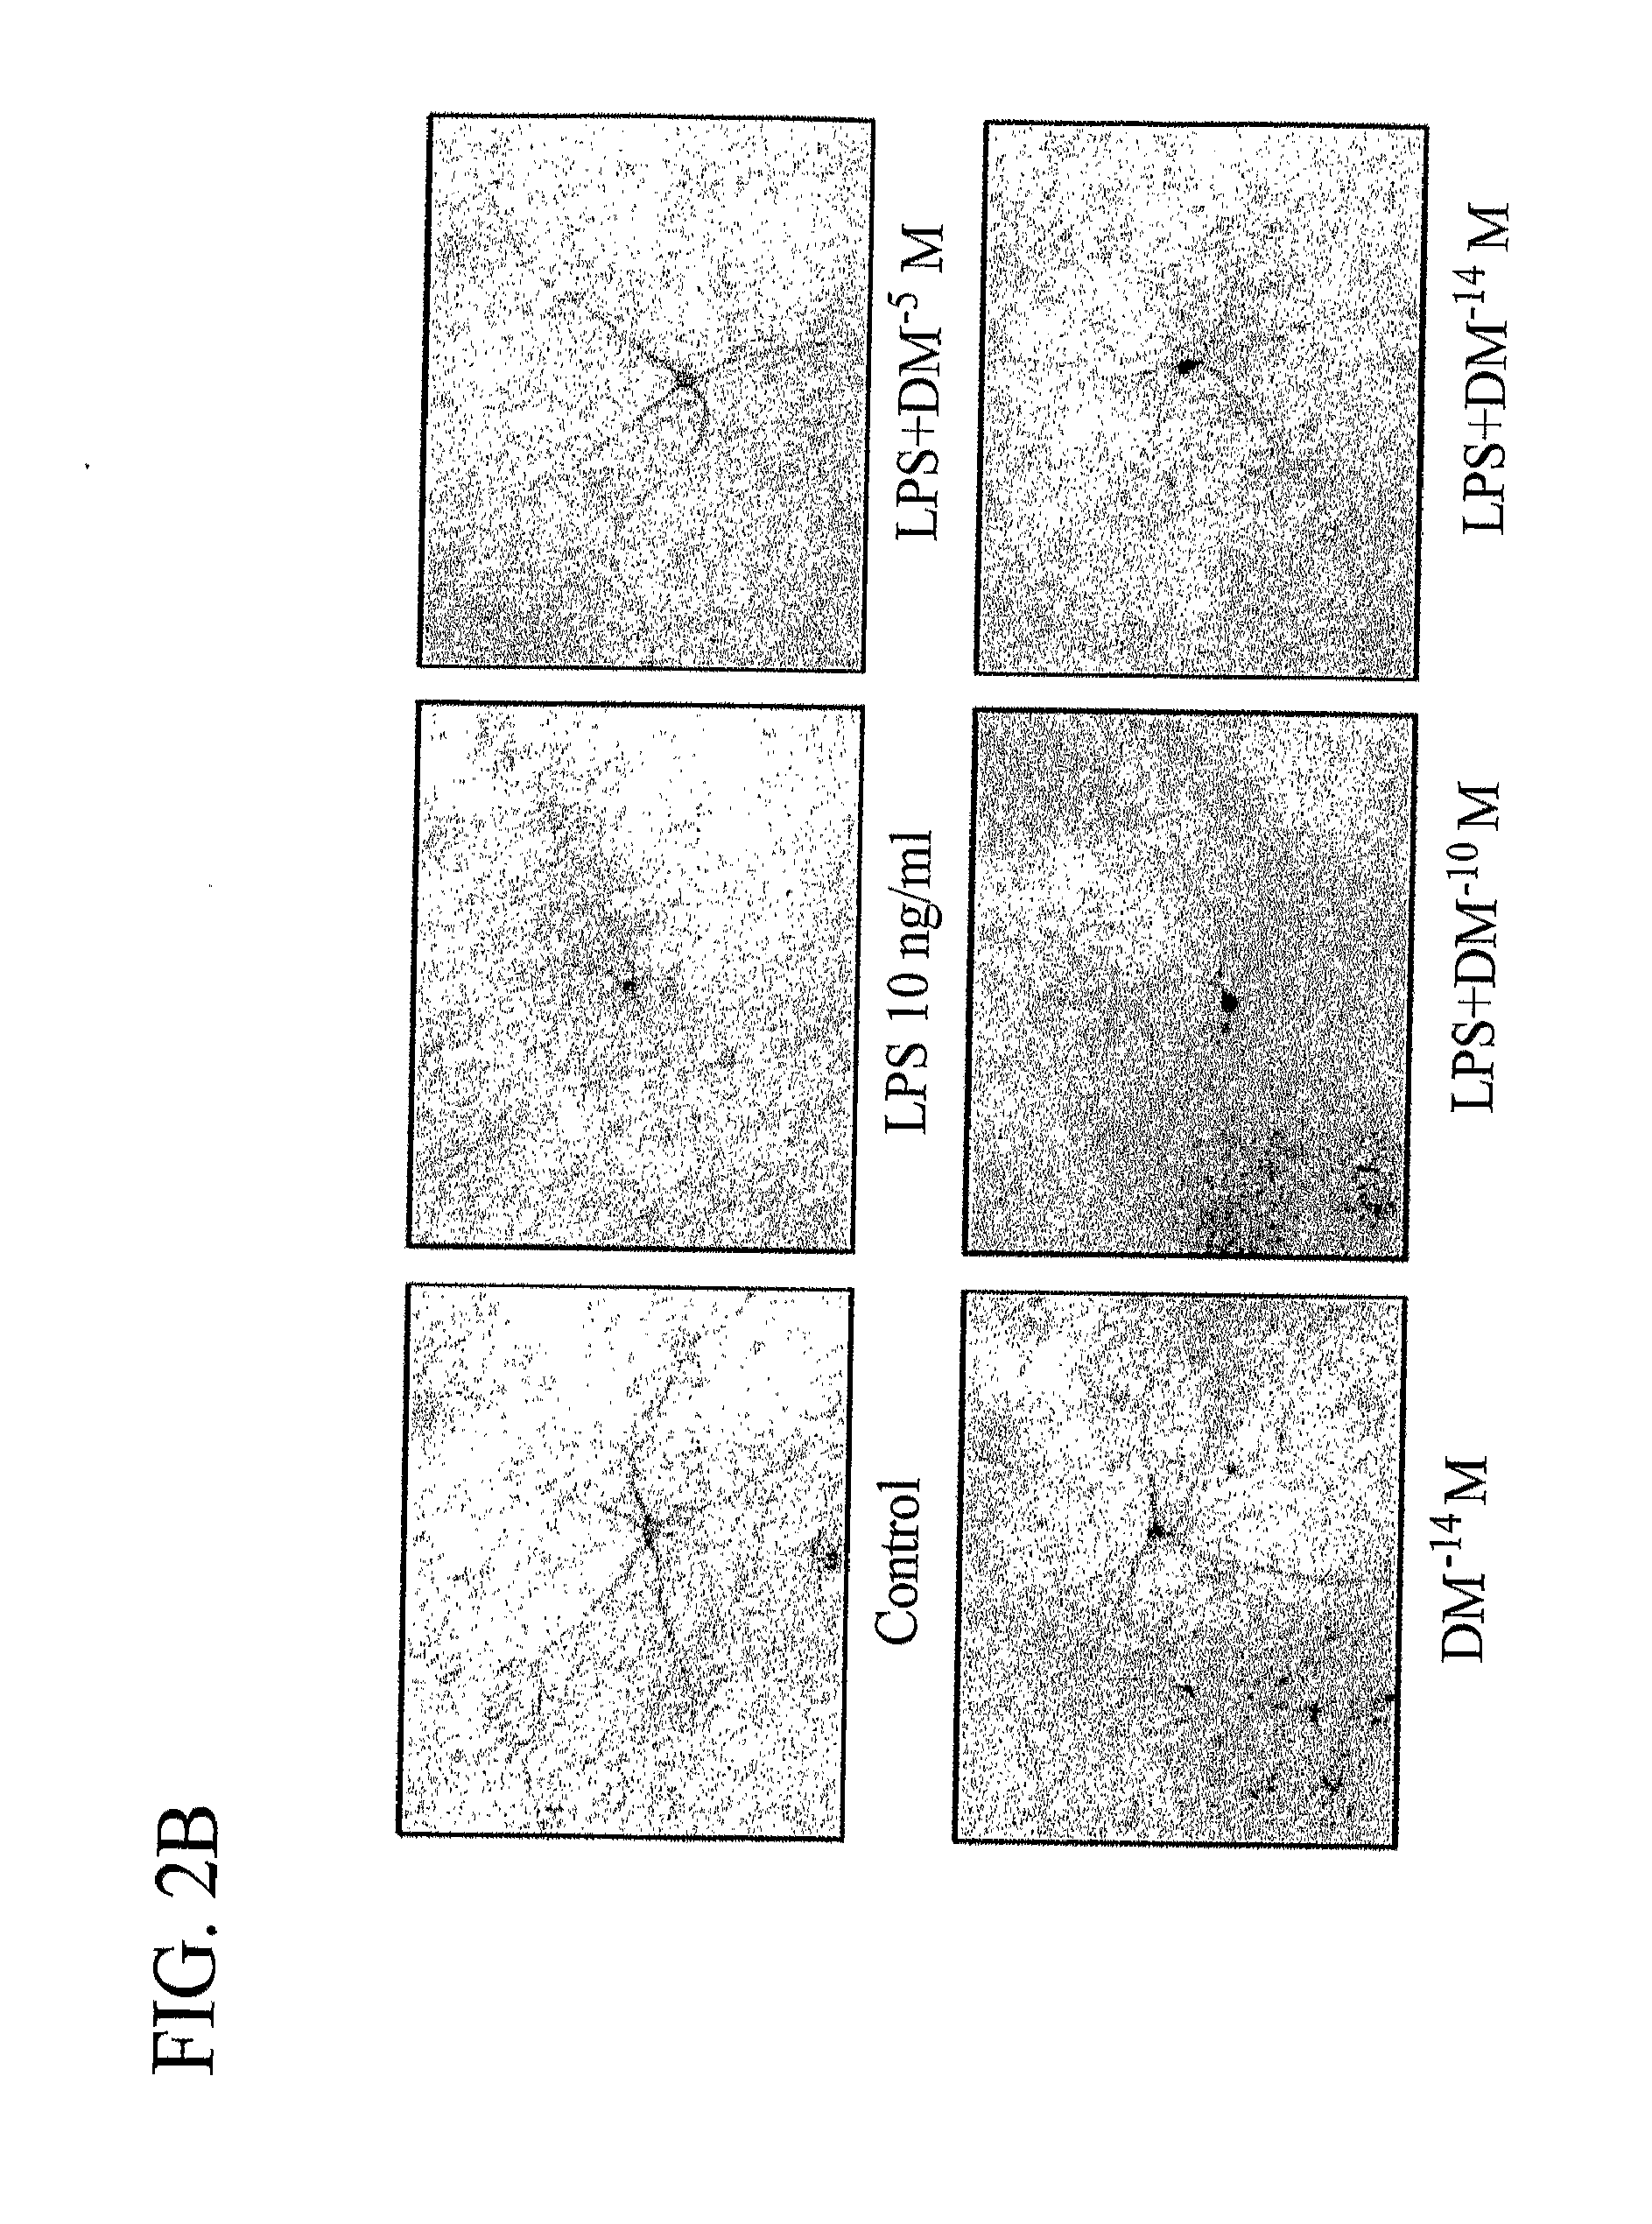 Methods related to the treatment of neurodegenerative and inflammatory conditions